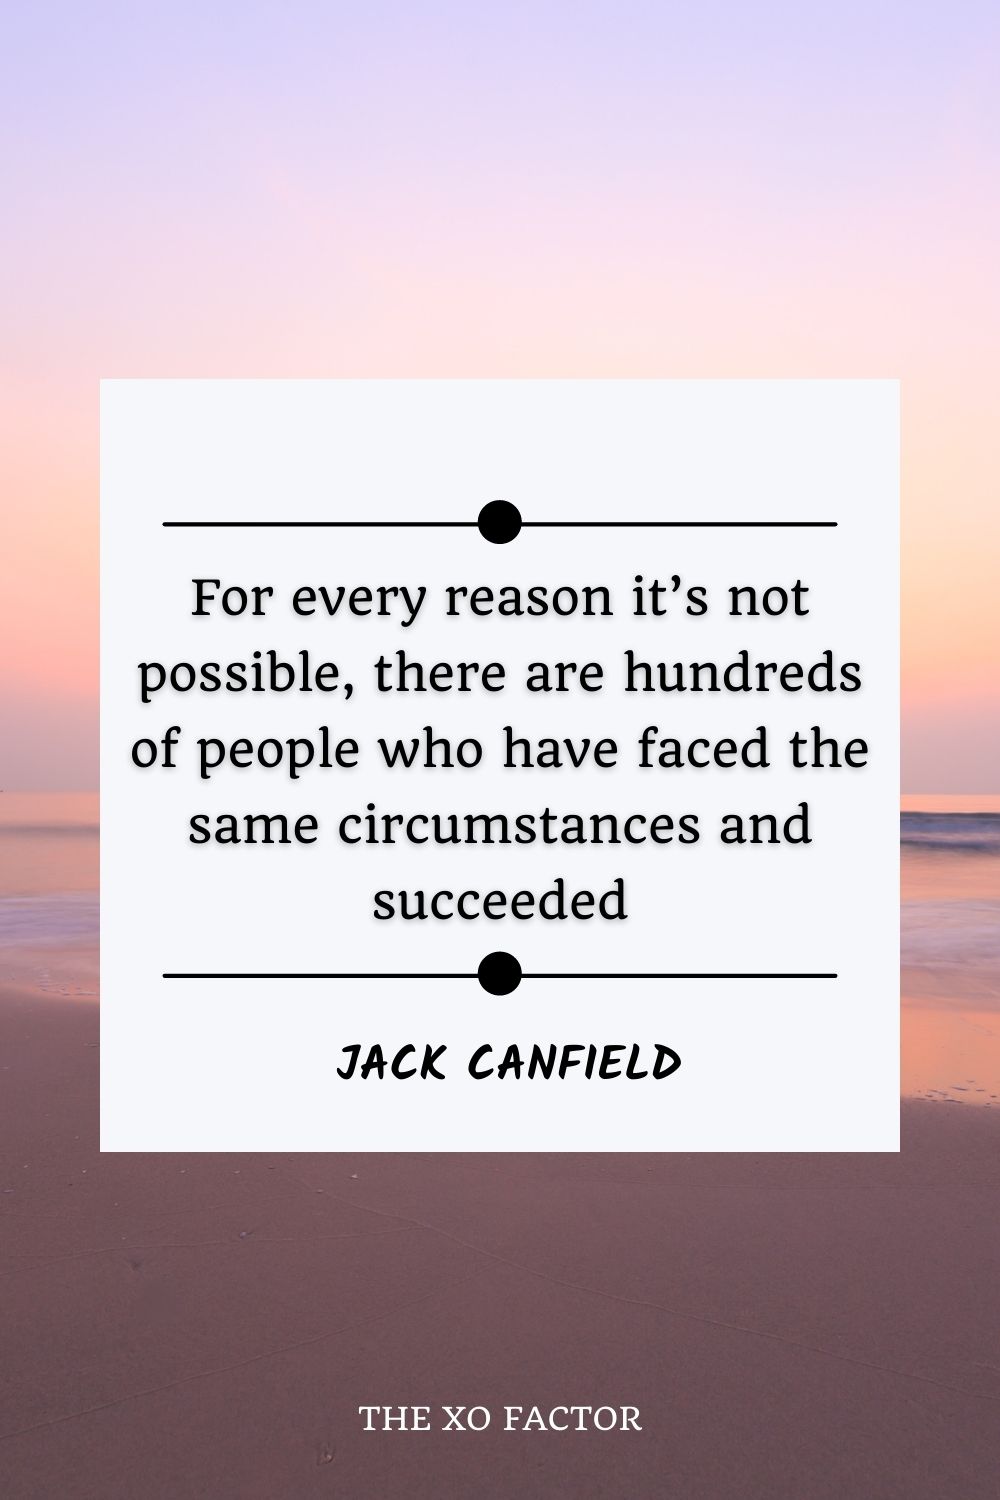 For every reason it’s not possible, there are hundreds of people who have faced the same circumstances and succeeded.” – Jack Canfield